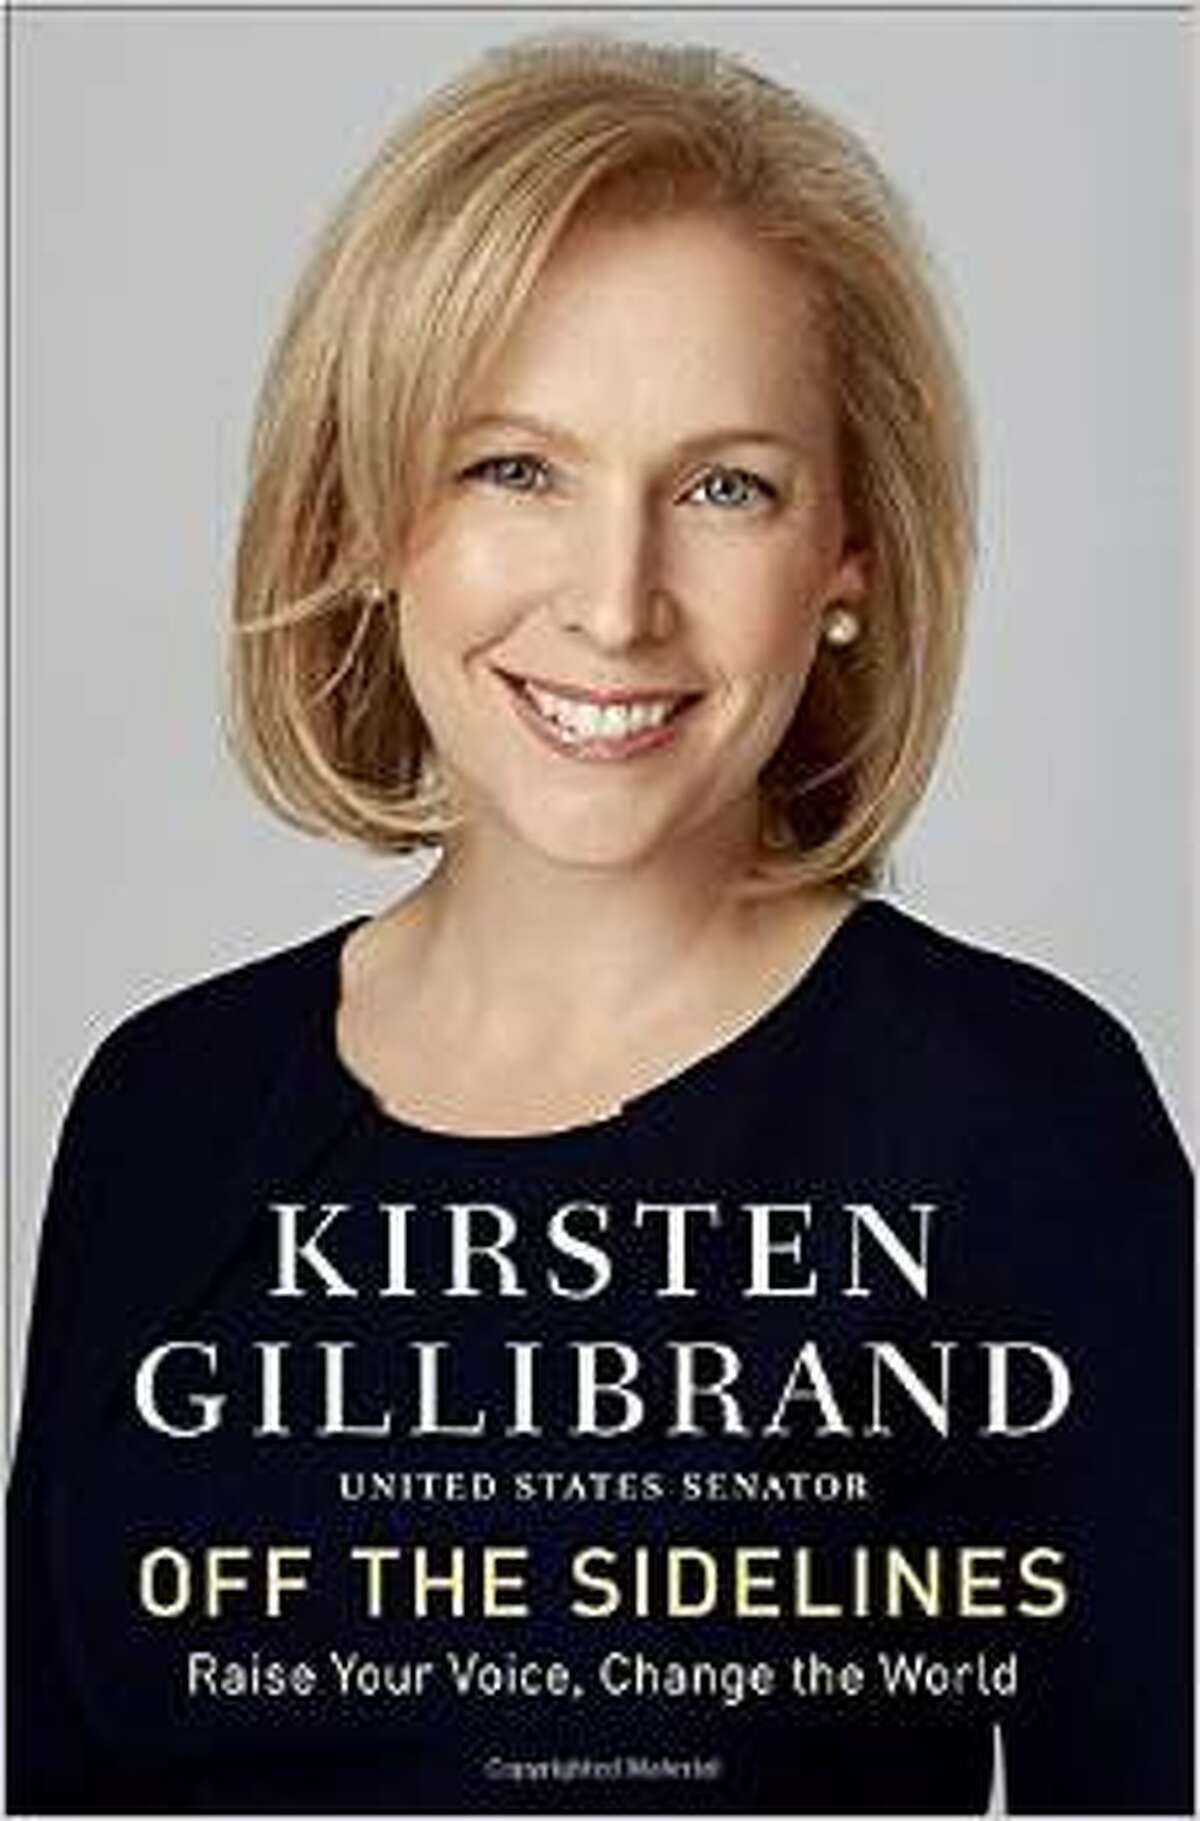 Cover of "Off the Sidelines, Raise Your Voice, Change the World" by U.S. Sen. Kiersten Gillibrand, D-NY, published 2014 by Ballantine Books.